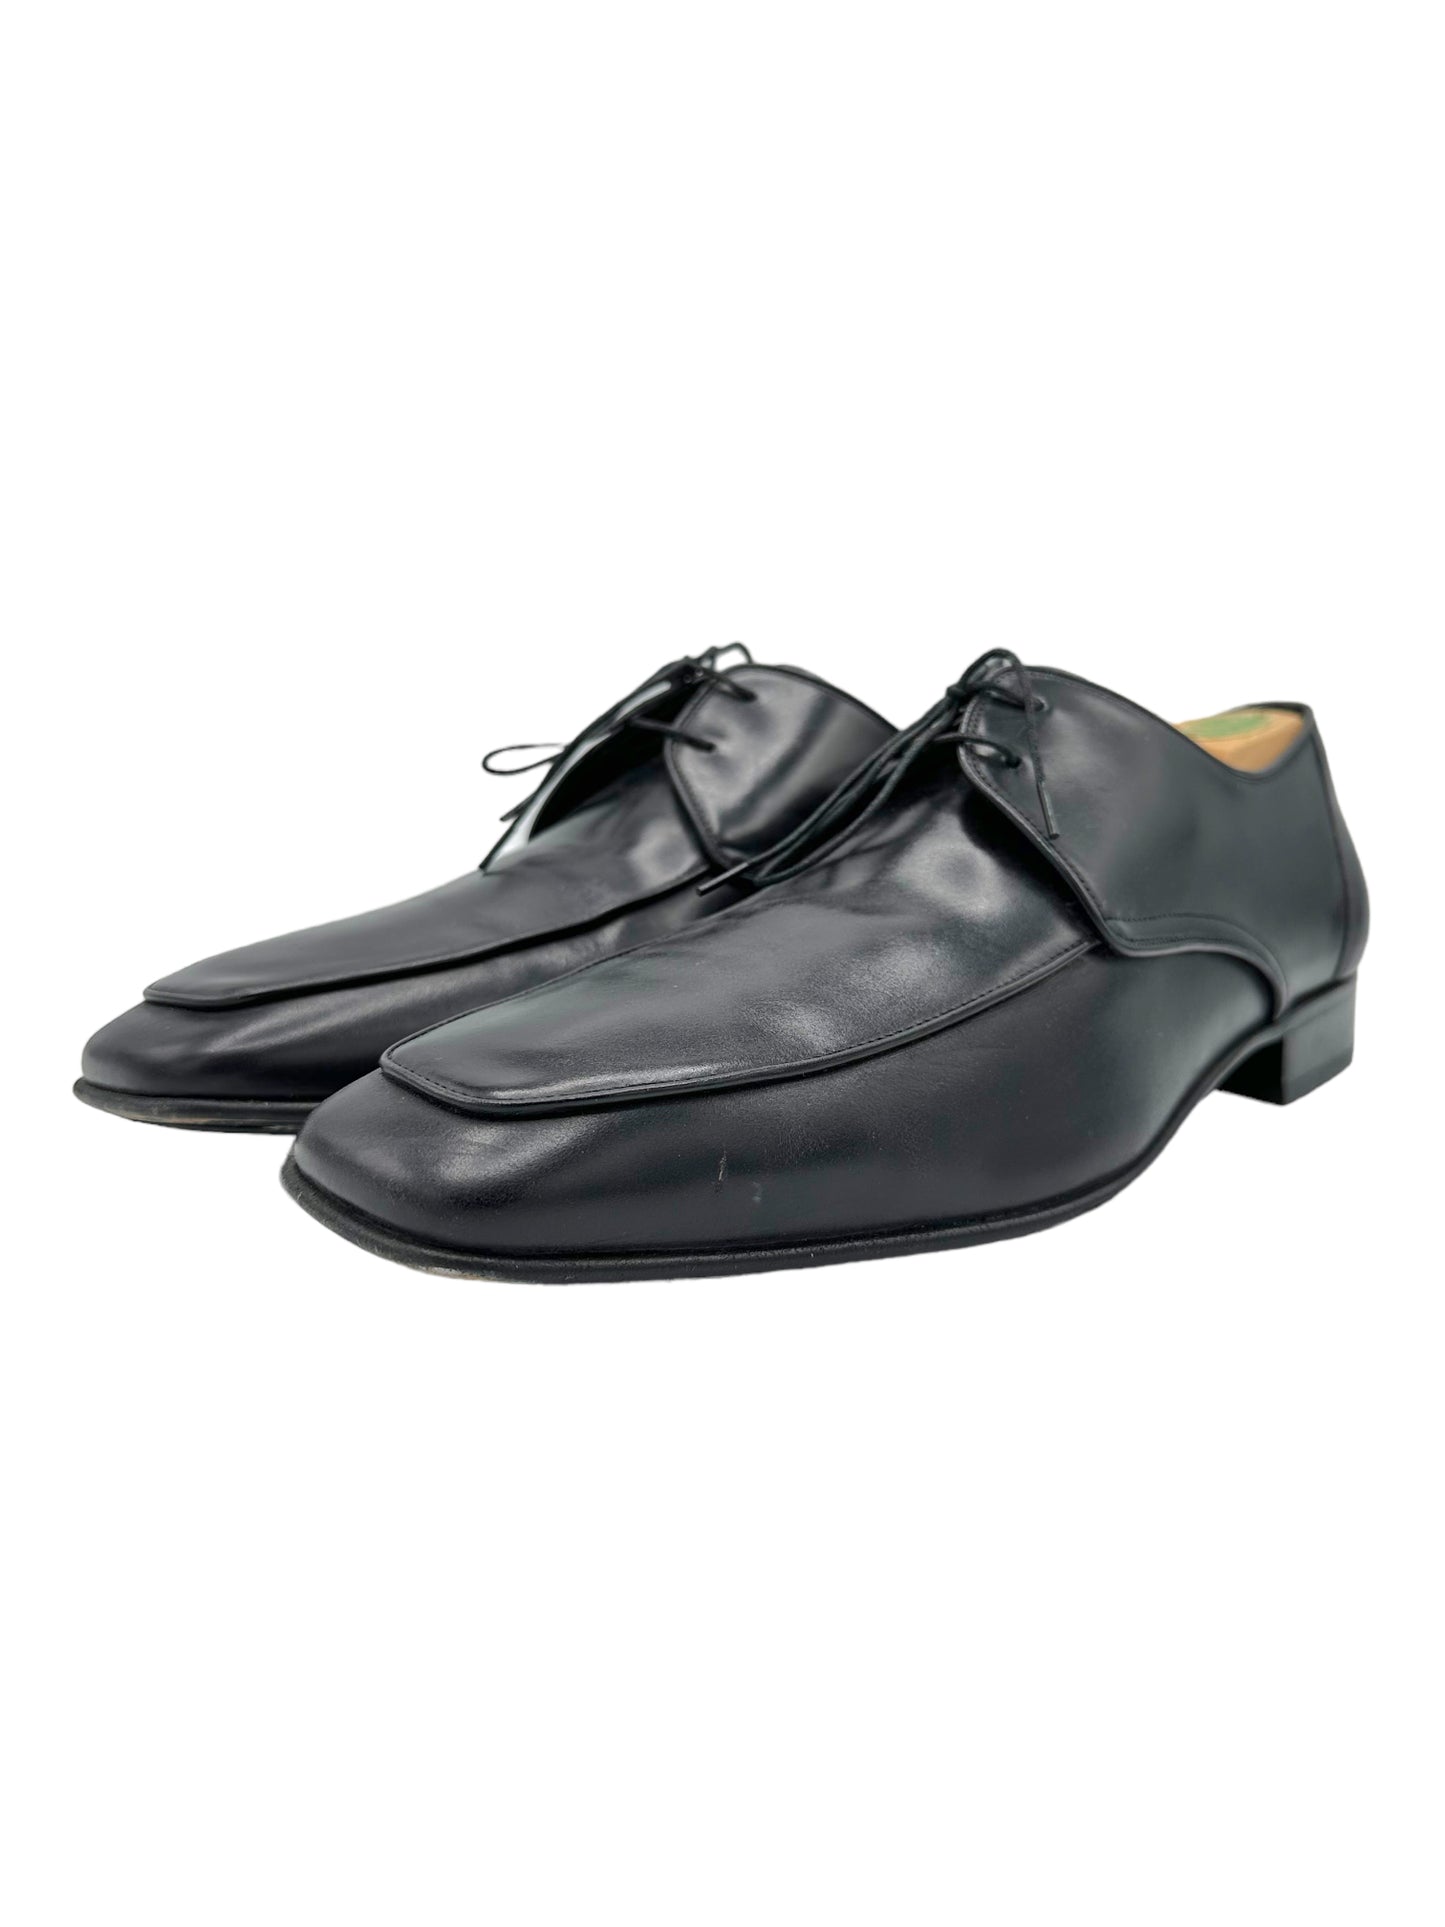 Salvatore Ferragamo Black Leather Derby Dress Shoes - Genuine Design Luxury Consignment for Men. New & Pre-Owned Clothing, Shoes, & Accessories. Calgary, Canada